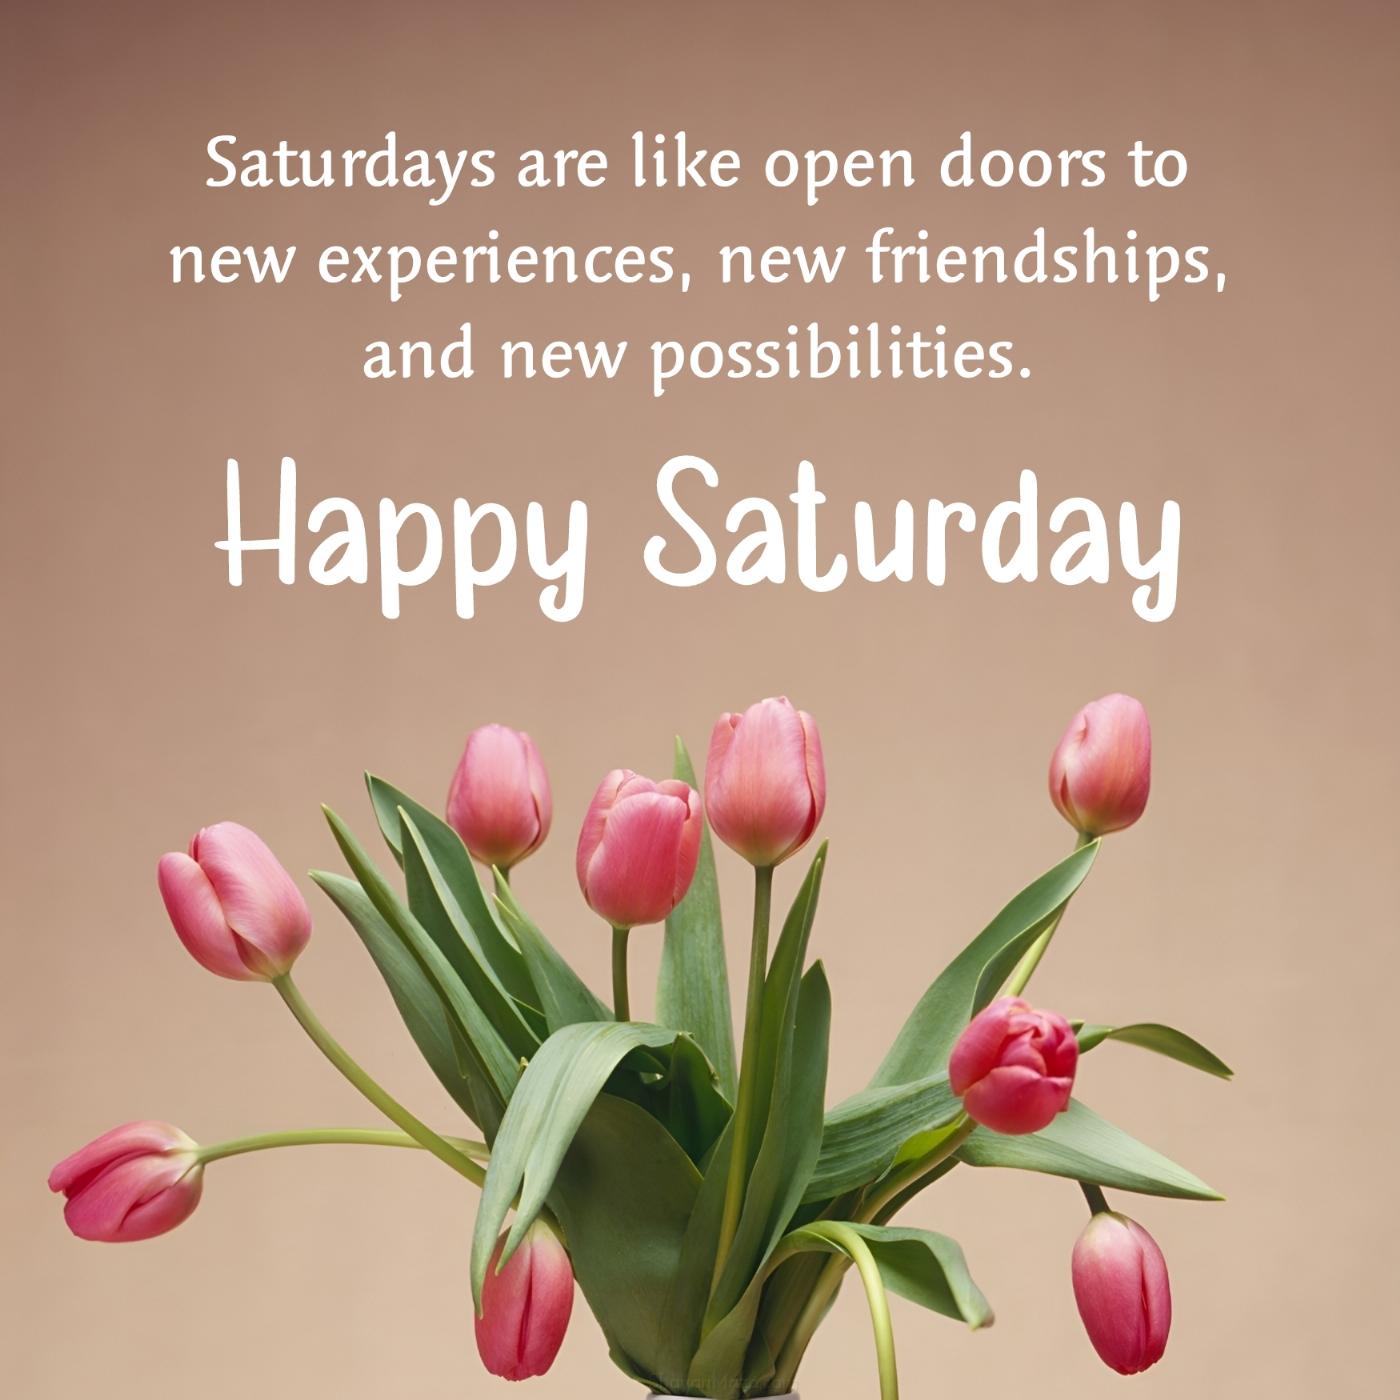 Saturdays are like open doors to new experiences